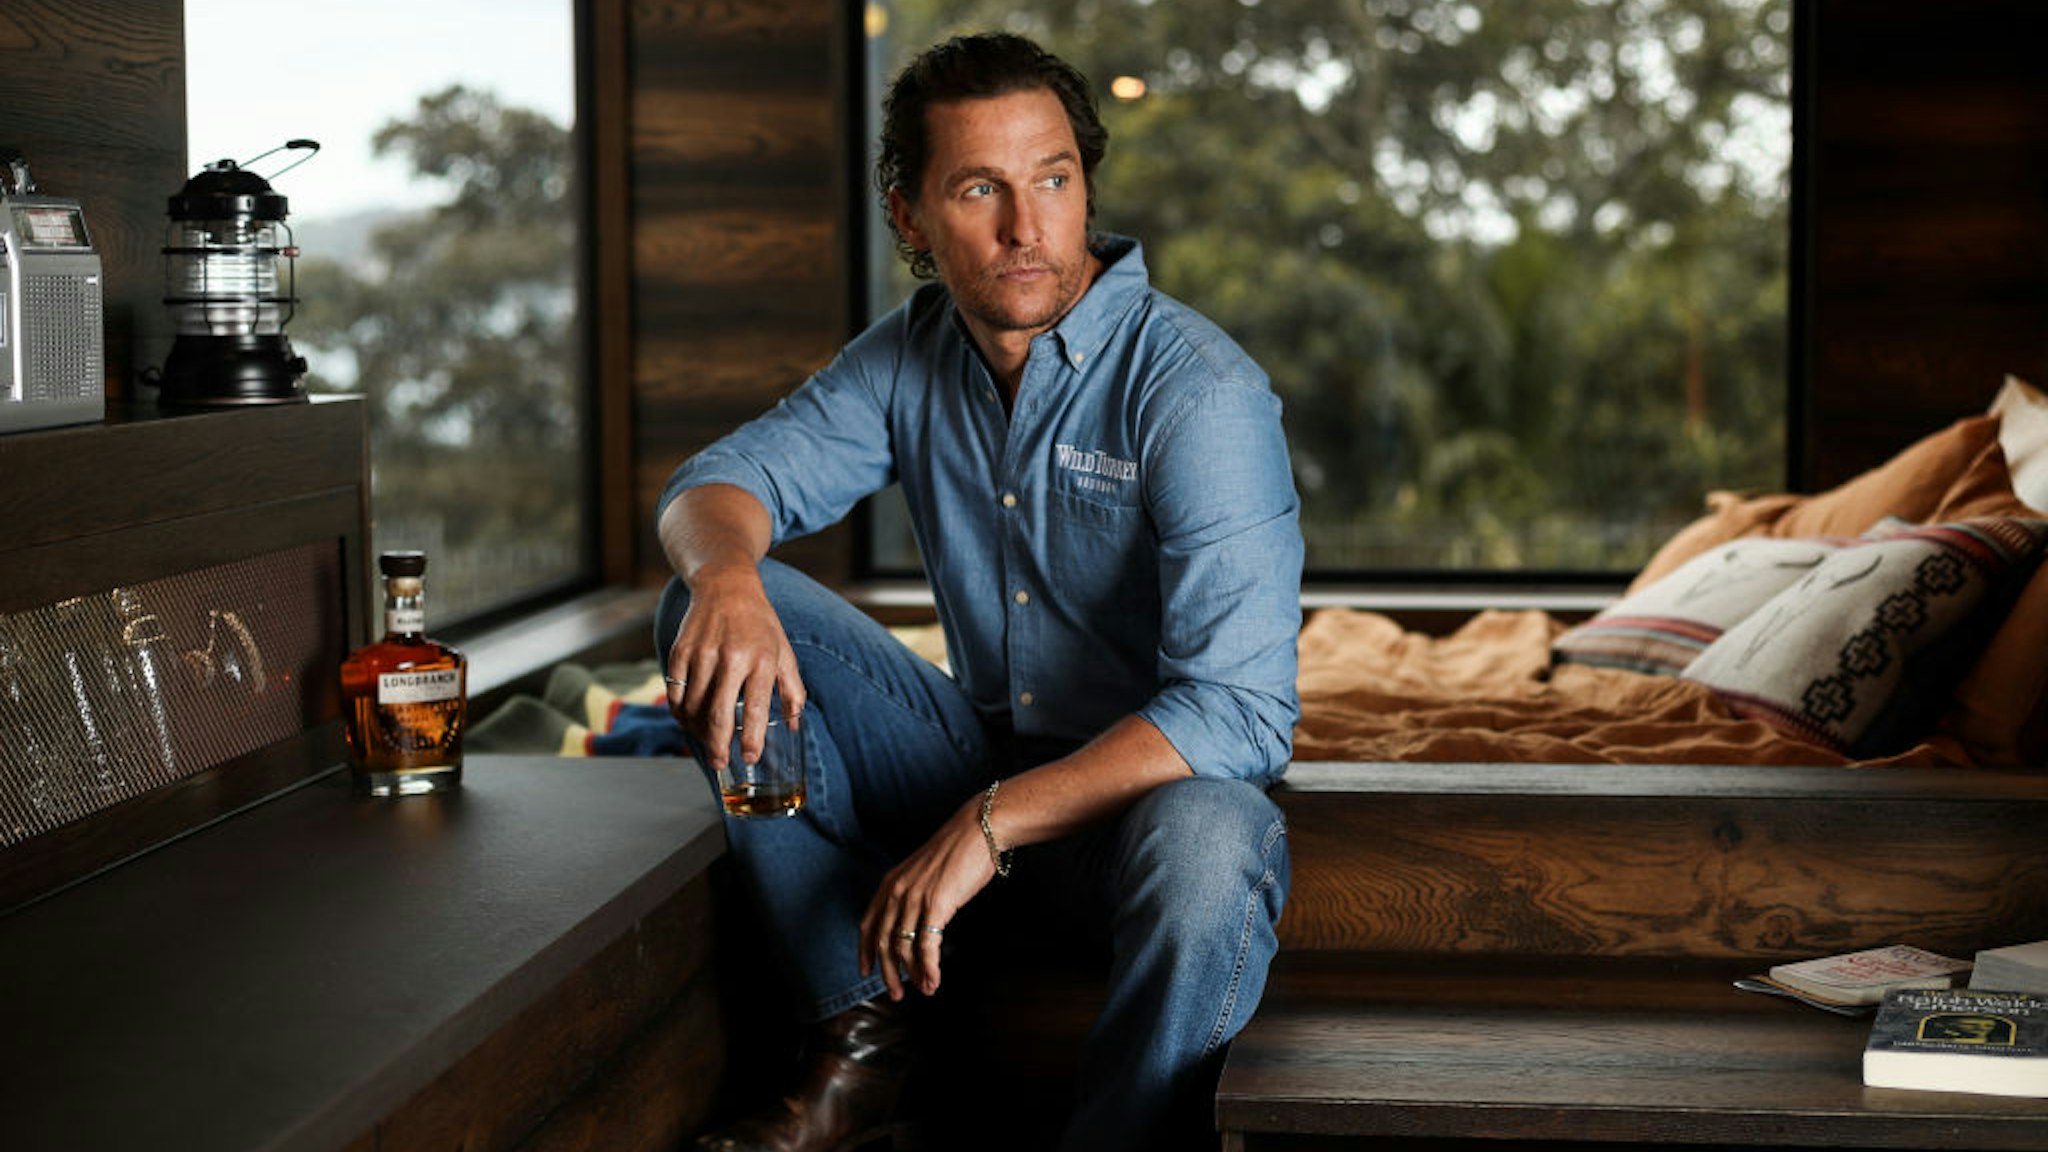 SYDNEY, AUSTRALIA - NOVEMBER 20: Matthew McConaughey launched an off-grid cabin he co-designed with Wild Turkey's charity initiative, With Thanks, at The Royal Botanic Gardens November 20, 2019 in Sydney, Australia. (Photo by